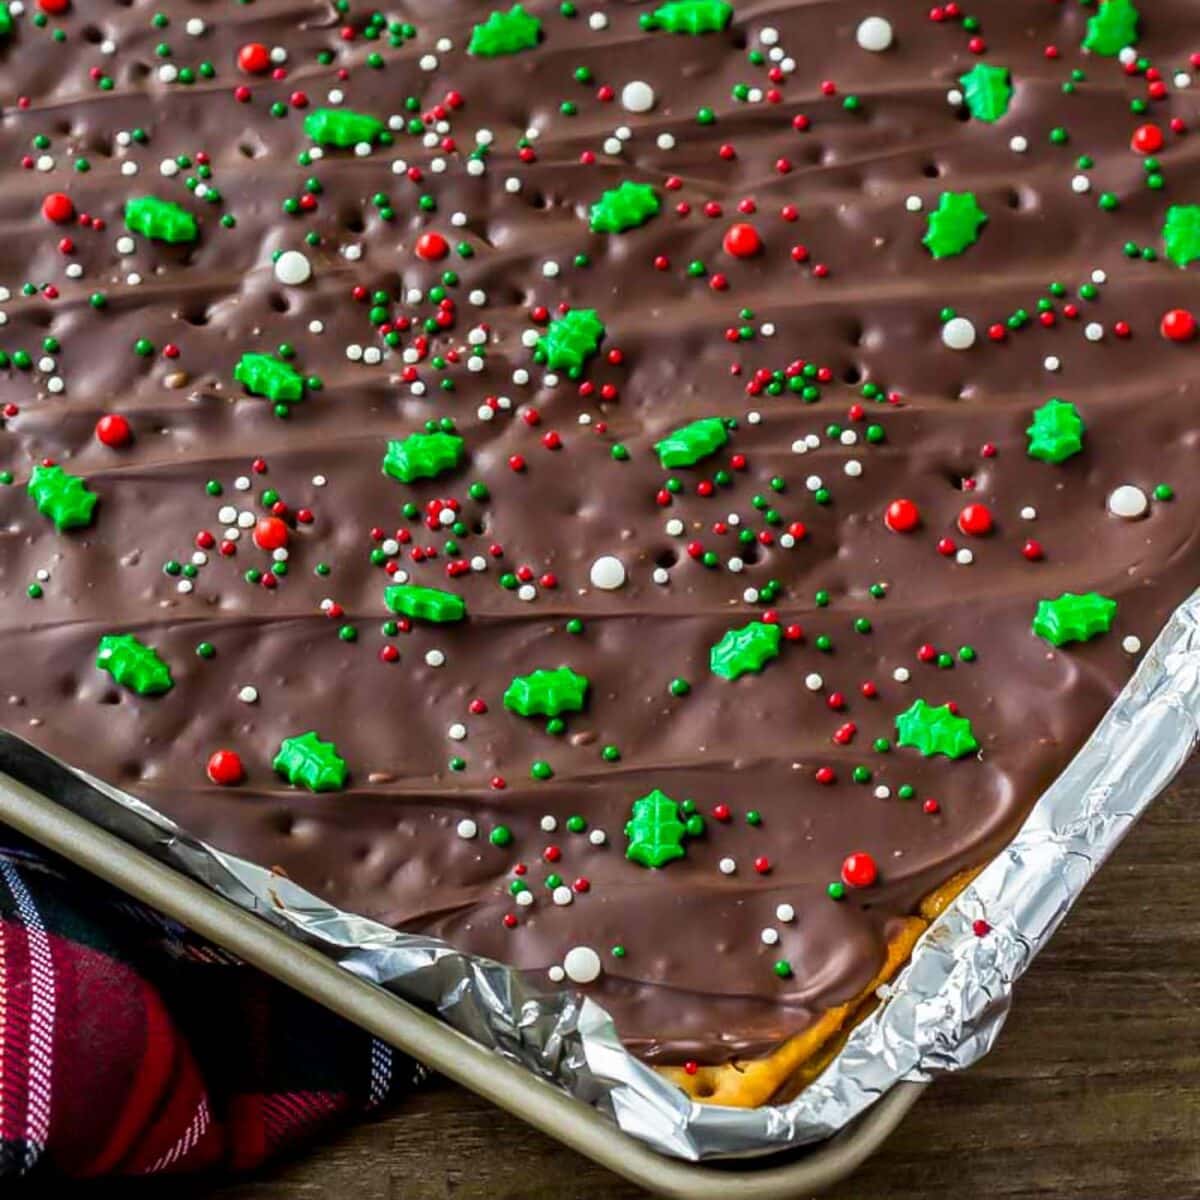 Chocolate covered cracker toffee topped with Christmas sprinkles.